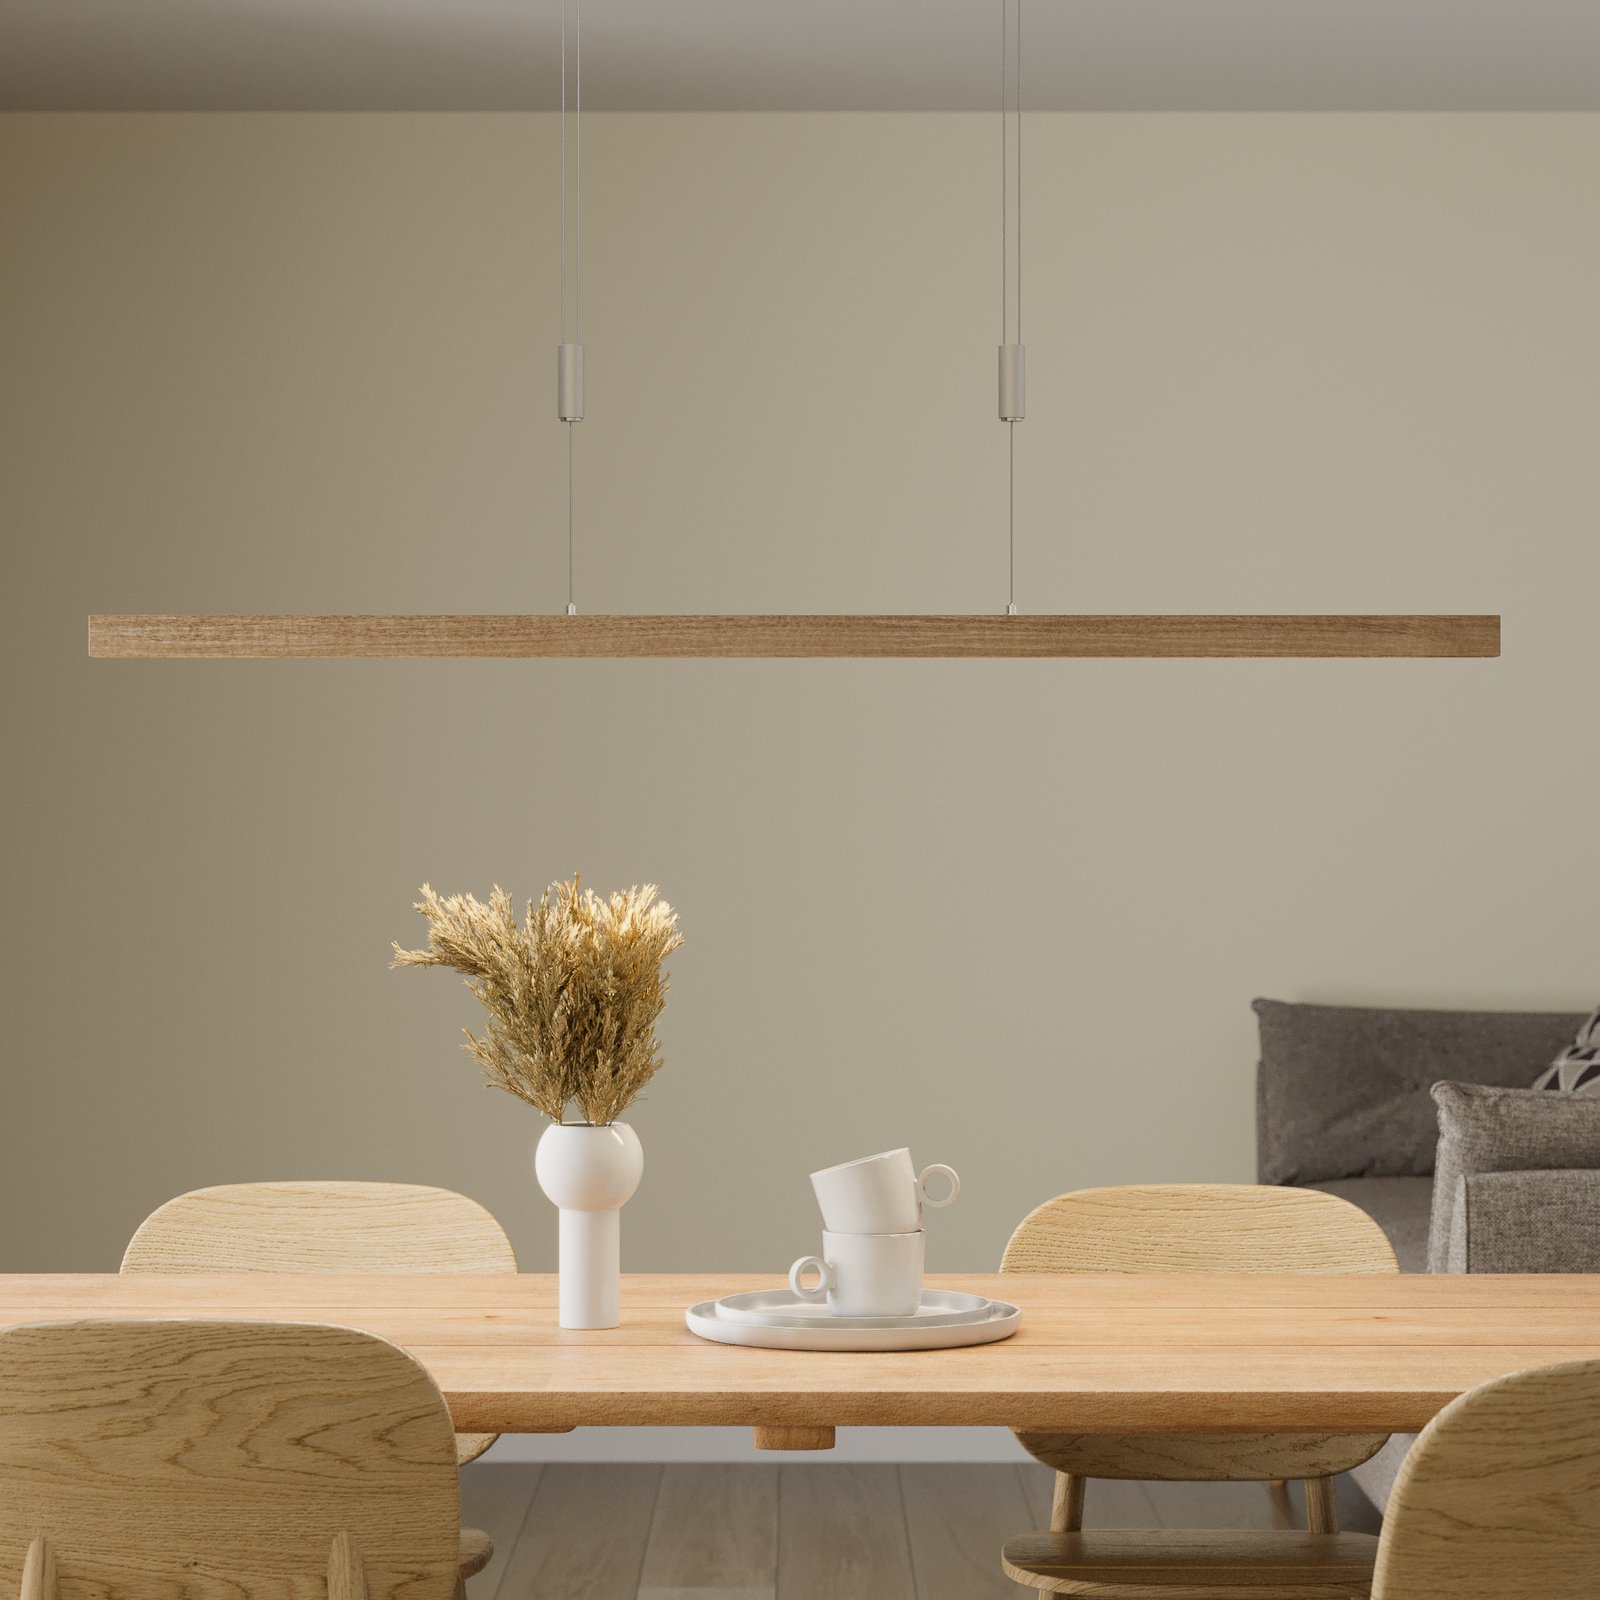 Rothfels Nora LED a sospensione, rovere, 118 cm